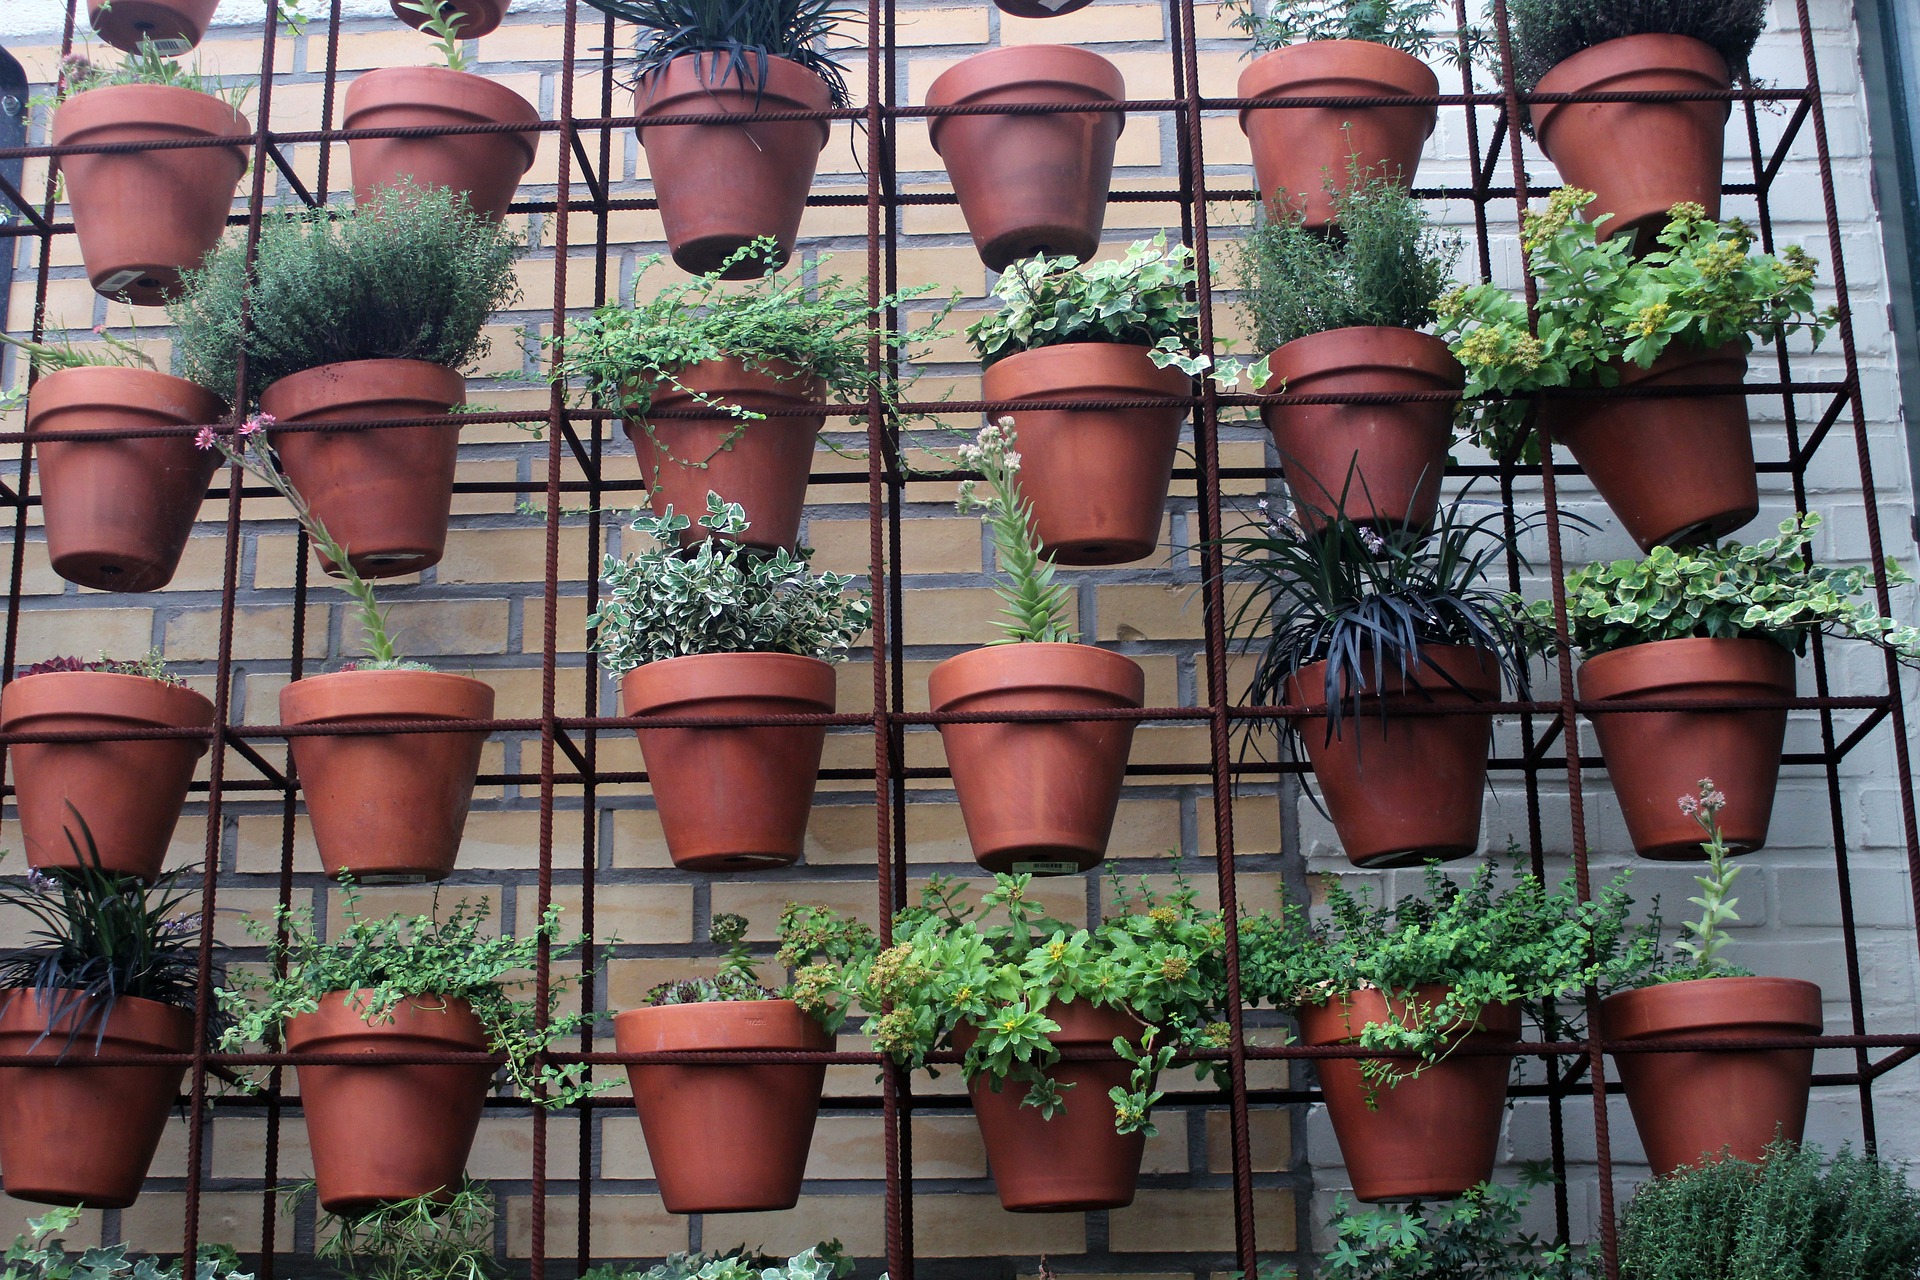 terracotta plant pots with greenery growing in them are arranged in a grid on a large black wire rack against a wall